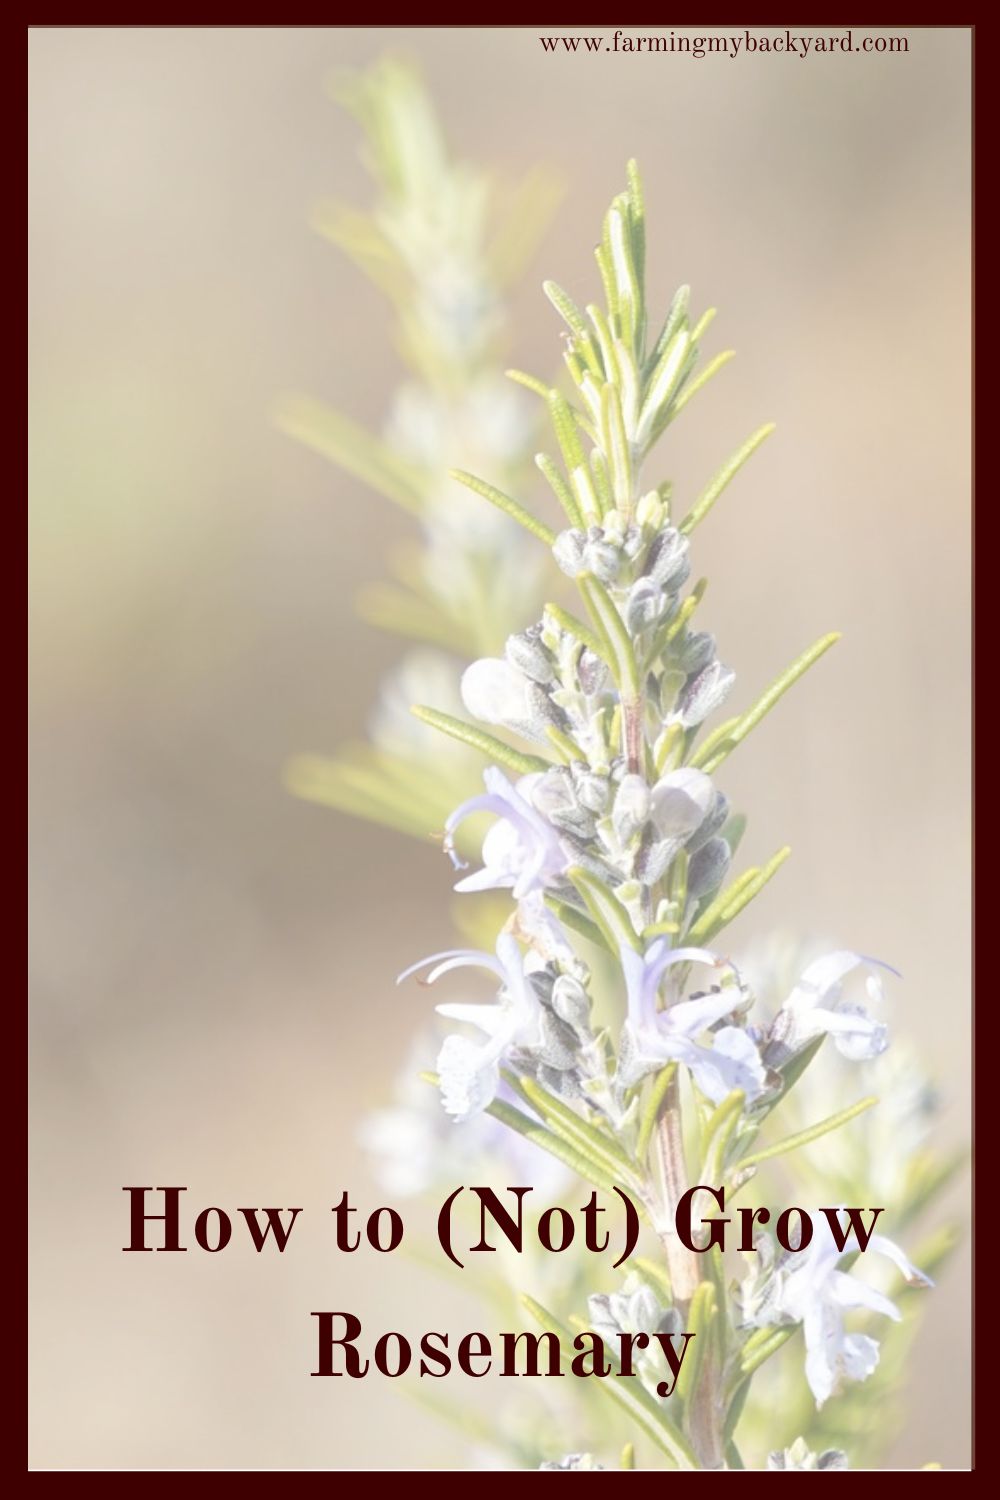 Rosemary is a beautiful culinary and medicinal herb. It's easy to grow, but learn from my mistakes. Here's how NOT to grow rosemary!